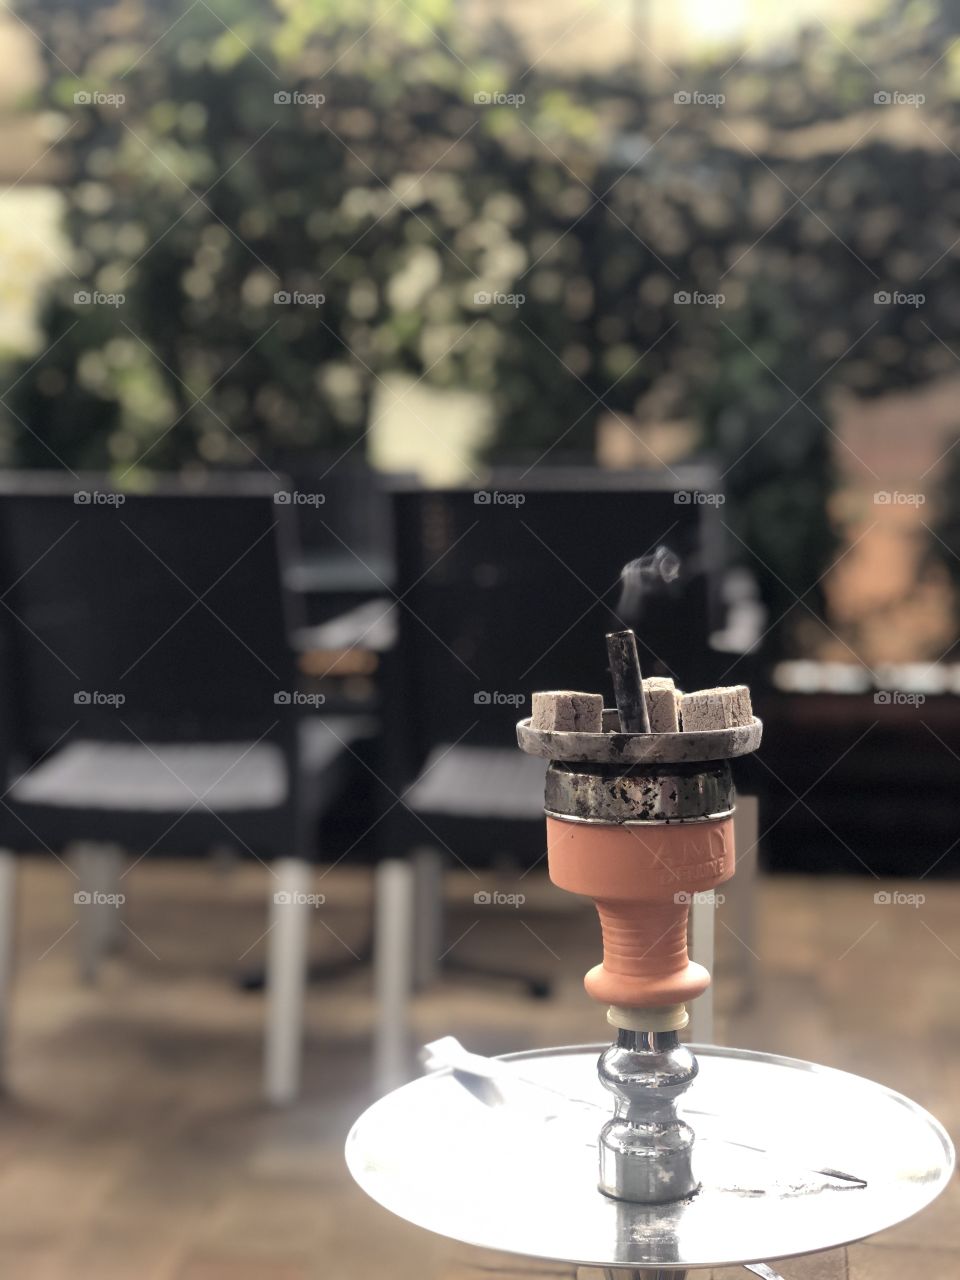 Another photo. I learning with focus and colors, in the future i will be better with this things but its not bad for beggining, i enjoy in shisha in this rainy day in Belgrade, Serbia. Come and visit my caffe bar